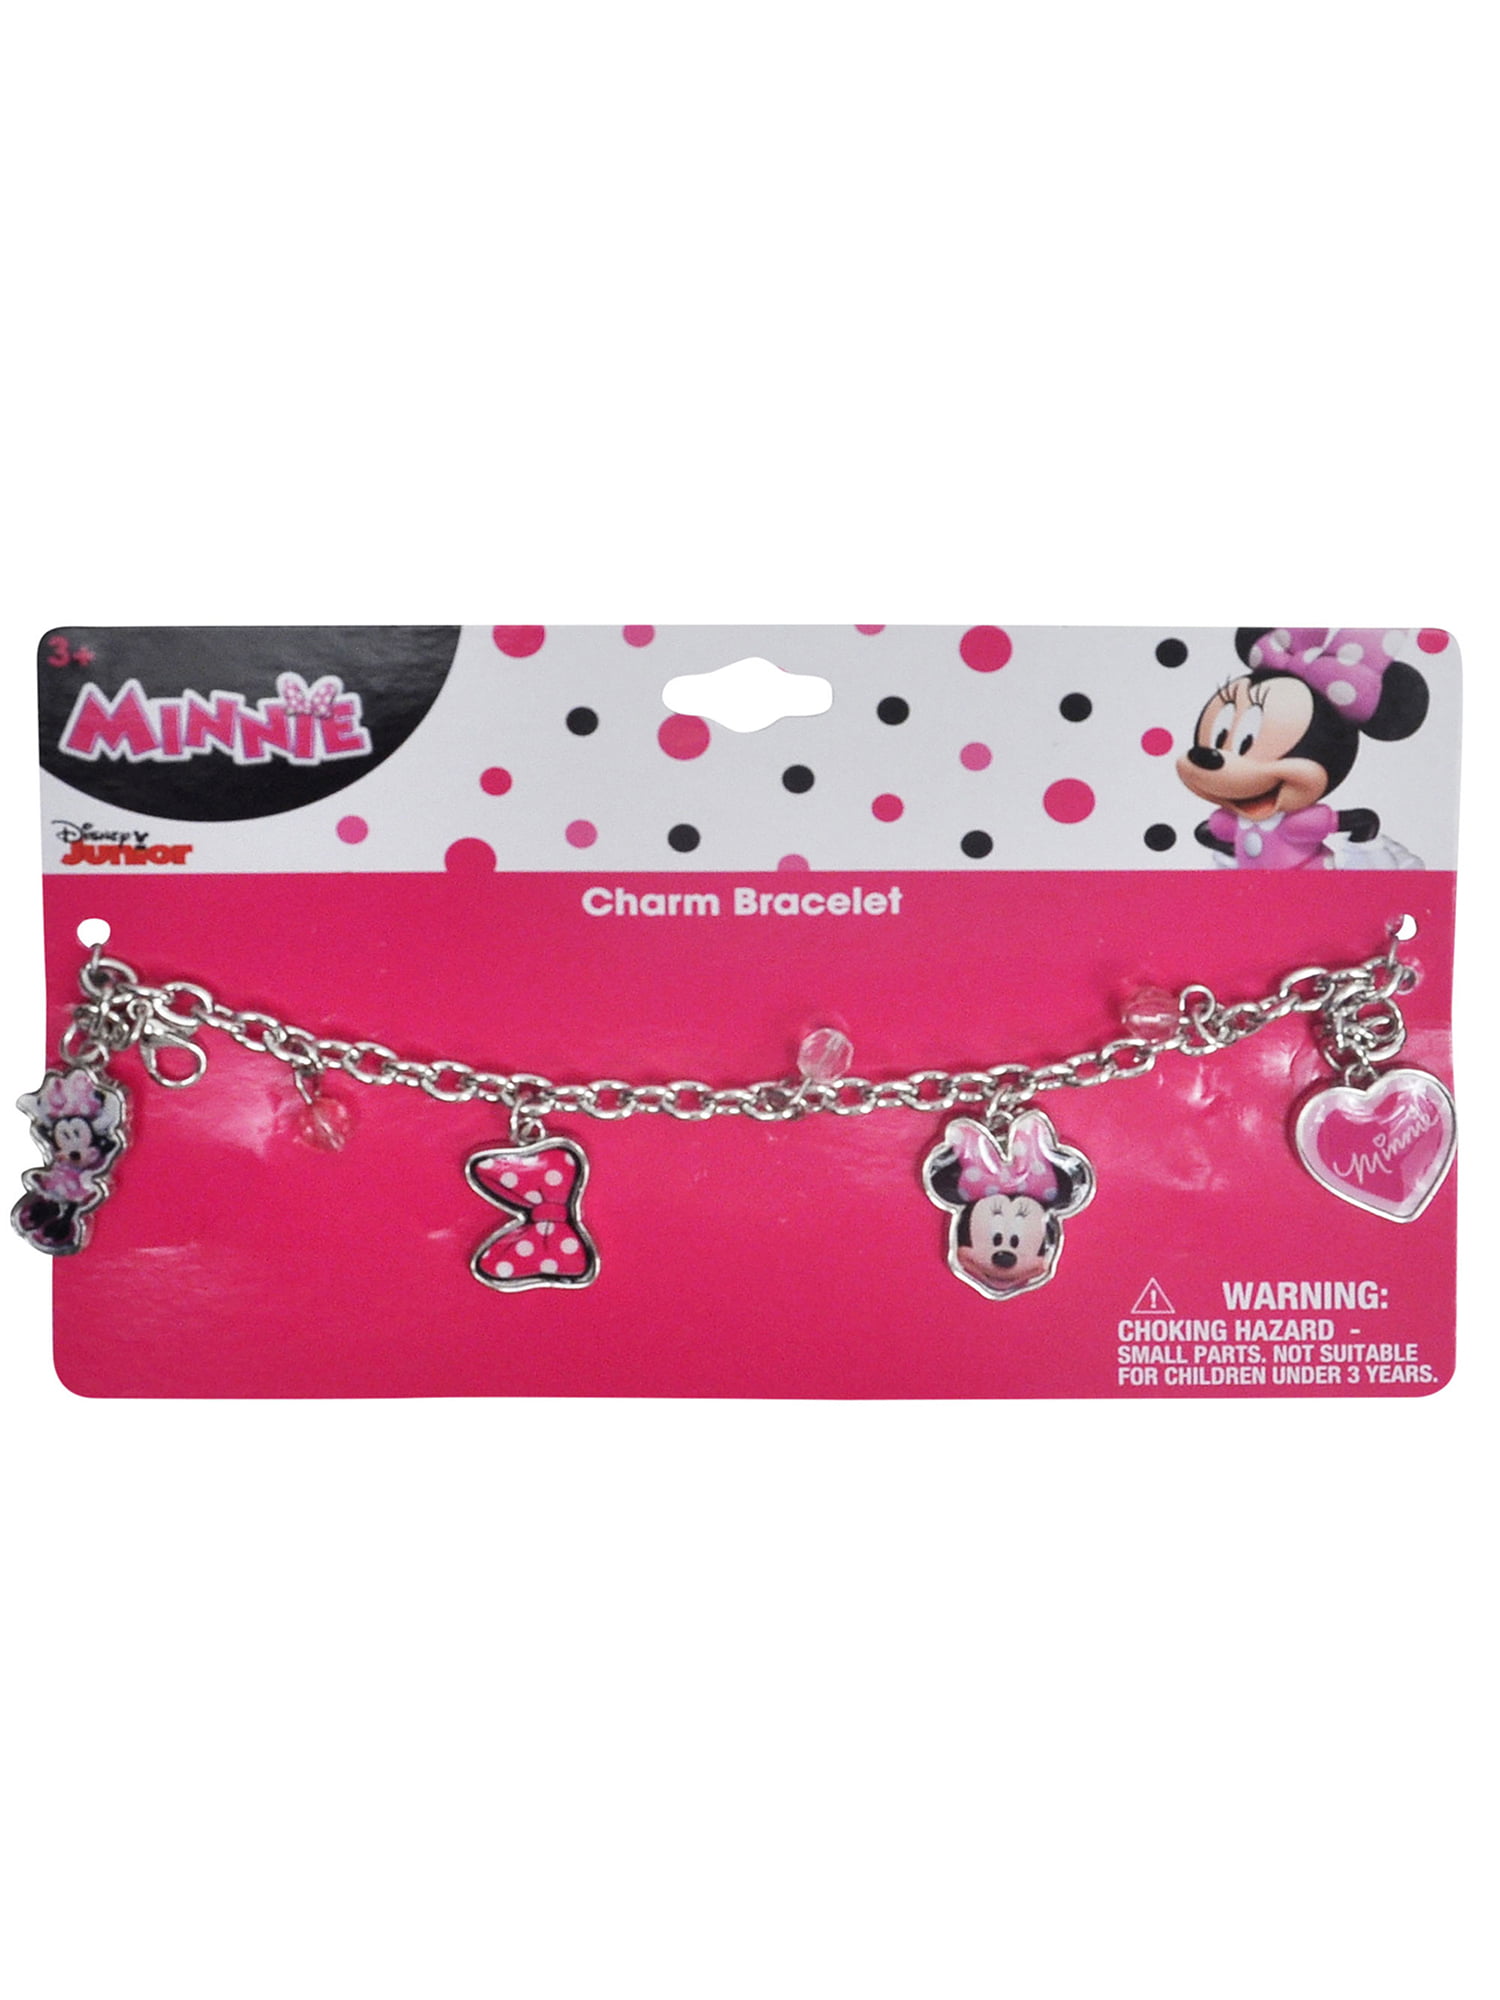 Details about   Mickey Minnie Mouse Themed Disney Princess /European Charms Bracelet Brand New C 